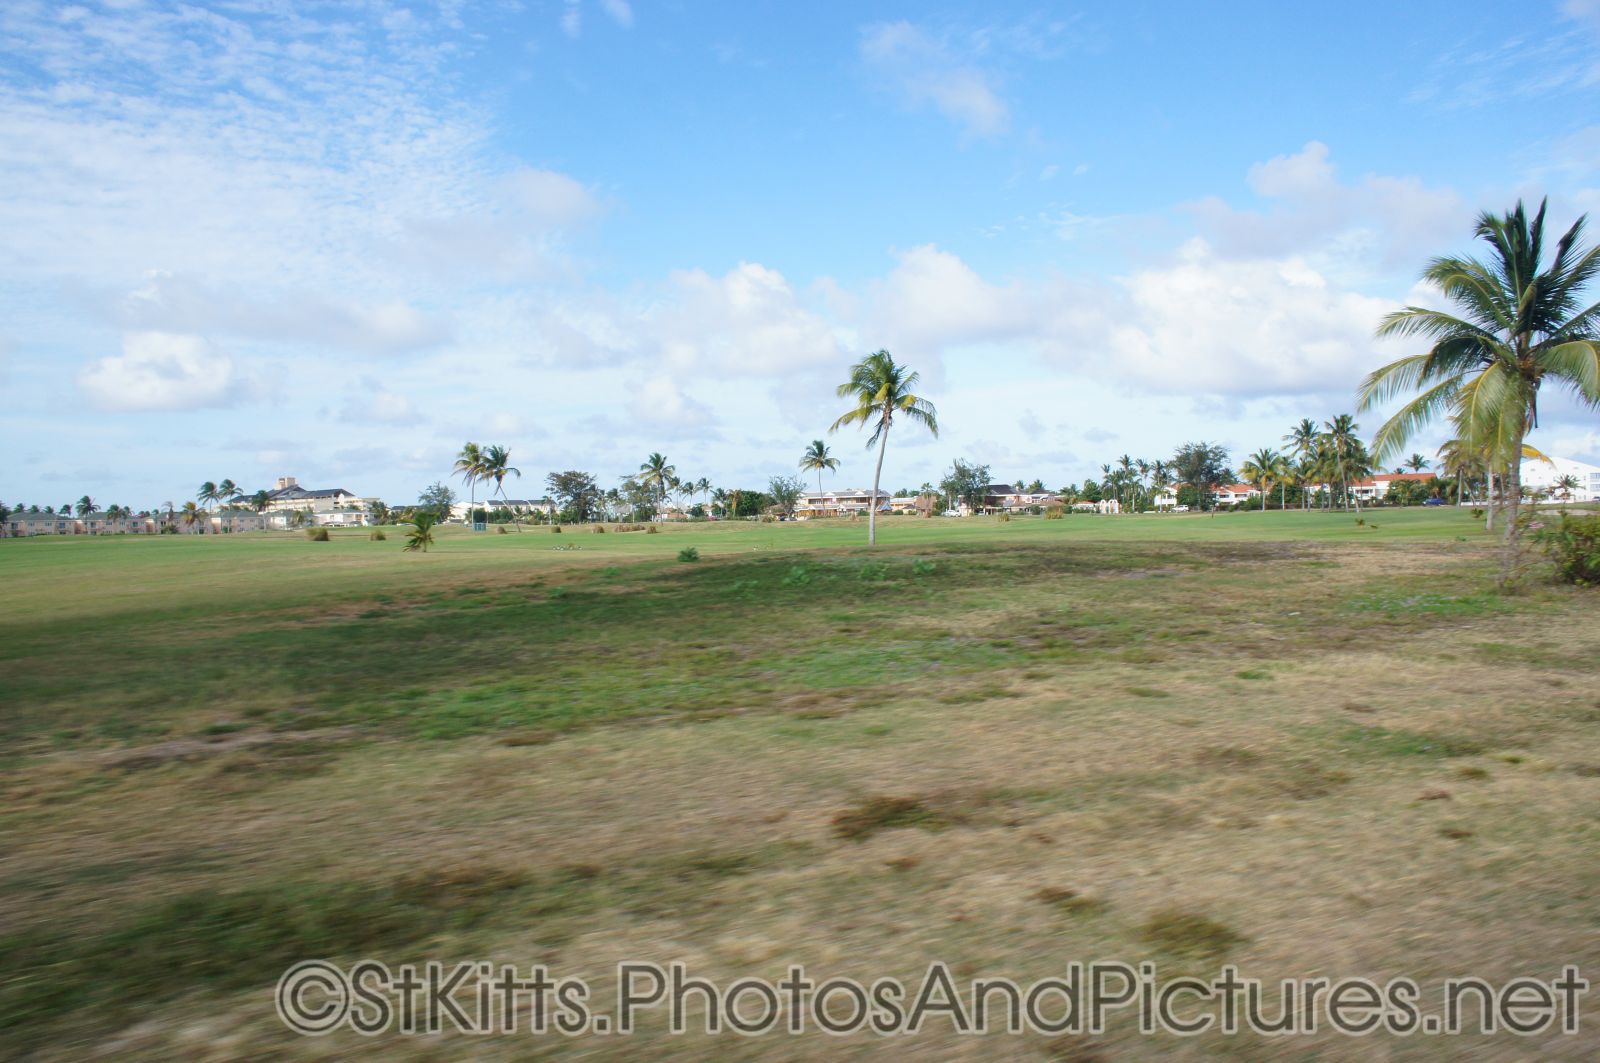 Golf course in St Kitts.jpg
